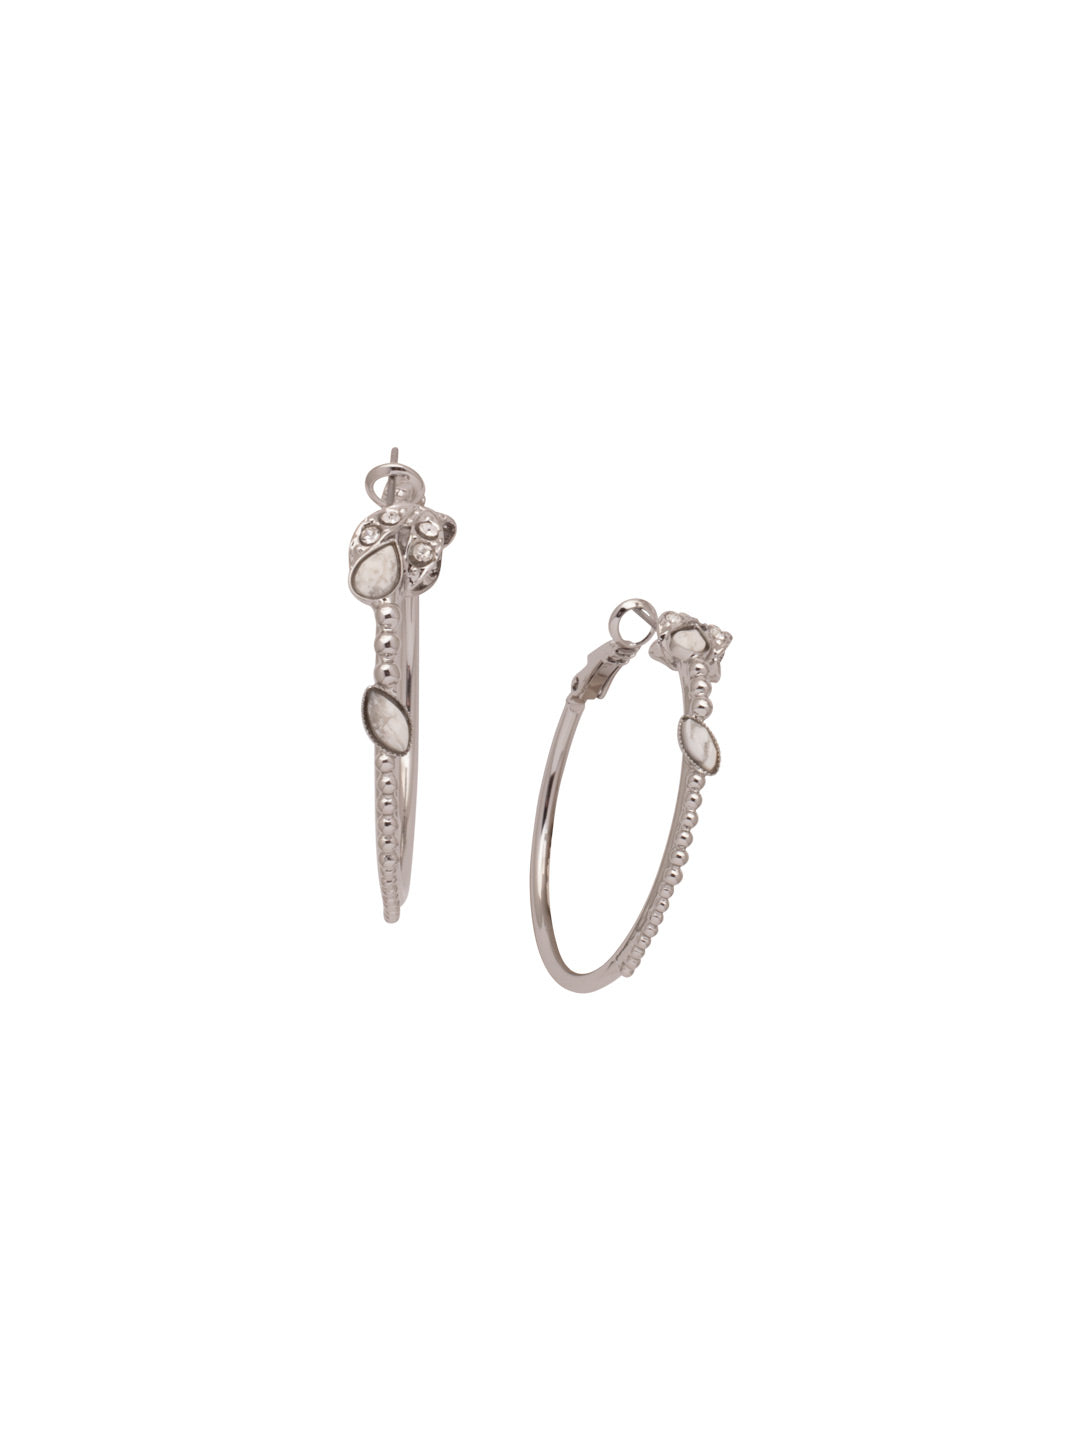 Sandy Hoop Earring - EEZ17PDCRY - <p>The Sandy Hoop Earrings feature a classic hoop, embellished with various sizes and colors of crystals and stones. From Sorrelli's Crystal collection in our Palladium finish.</p>